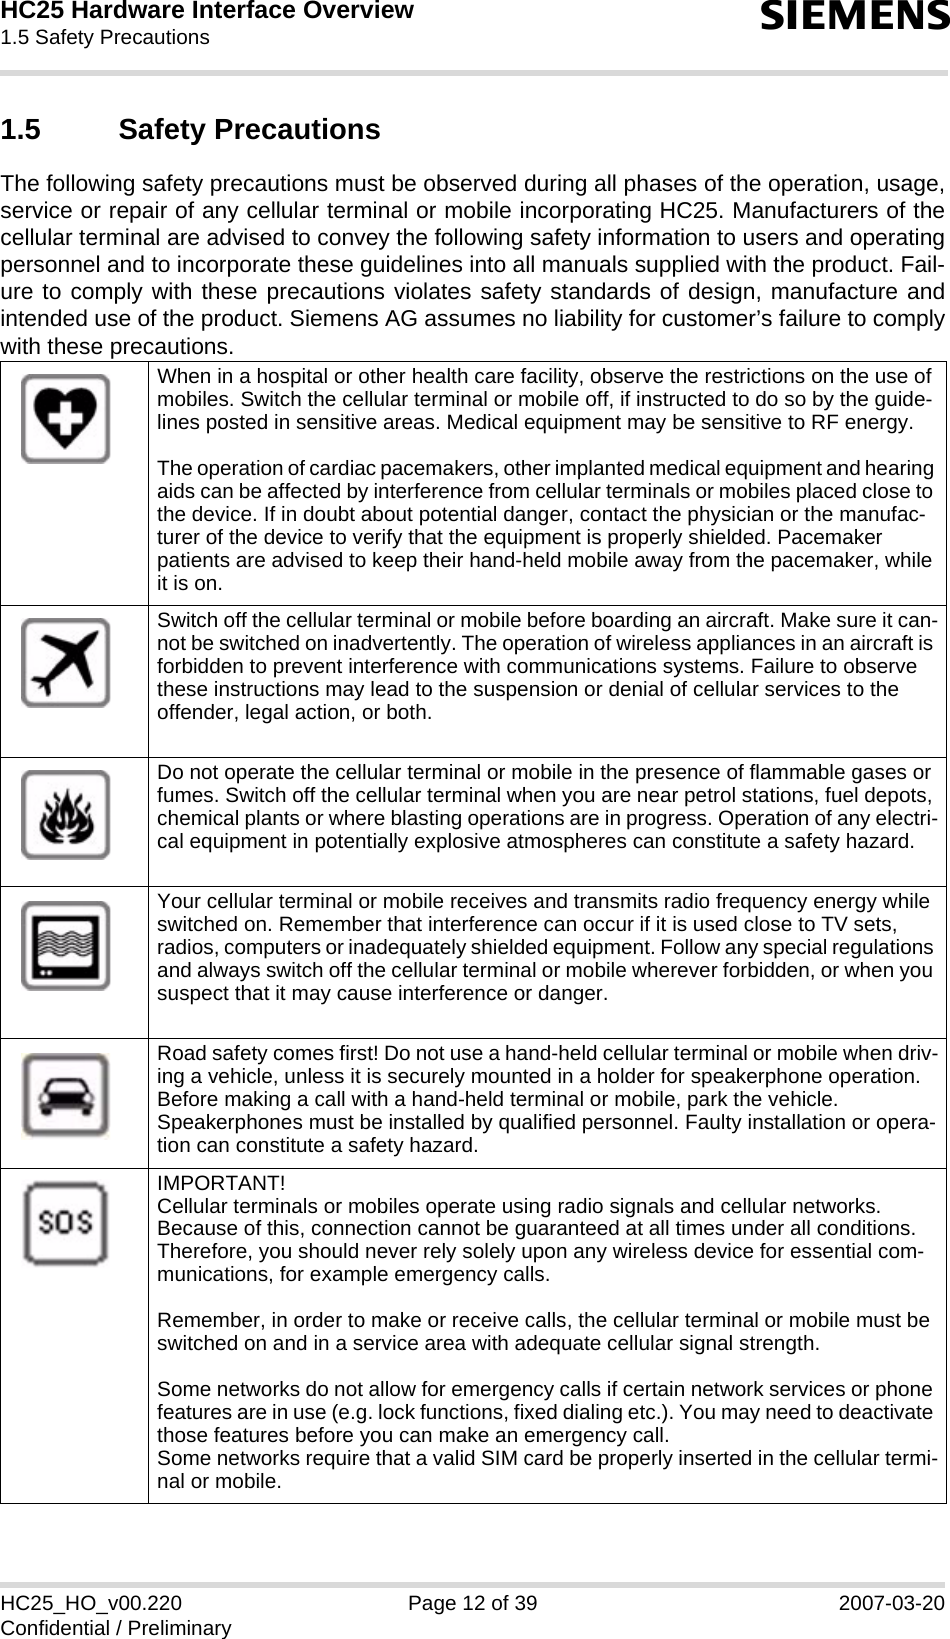 HC25 Hardware Interface Overview1.5 Safety Precautions12sHC25_HO_v00.220 Page 12 of 39 2007-03-20Confidential / Preliminary1.5 Safety PrecautionsThe following safety precautions must be observed during all phases of the operation, usage,service or repair of any cellular terminal or mobile incorporating HC25. Manufacturers of thecellular terminal are advised to convey the following safety information to users and operatingpersonnel and to incorporate these guidelines into all manuals supplied with the product. Fail-ure to comply with these precautions violates safety standards of design, manufacture andintended use of the product. Siemens AG assumes no liability for customer’s failure to complywith these precautions.When in a hospital or other health care facility, observe the restrictions on the use of mobiles. Switch the cellular terminal or mobile off, if instructed to do so by the guide-lines posted in sensitive areas. Medical equipment may be sensitive to RF energy.The operation of cardiac pacemakers, other implanted medical equipment and hearing aids can be affected by interference from cellular terminals or mobiles placed close to the device. If in doubt about potential danger, contact the physician or the manufac-turer of the device to verify that the equipment is properly shielded. Pacemaker patients are advised to keep their hand-held mobile away from the pacemaker, while it is on. Switch off the cellular terminal or mobile before boarding an aircraft. Make sure it can-not be switched on inadvertently. The operation of wireless appliances in an aircraft is forbidden to prevent interference with communications systems. Failure to observe these instructions may lead to the suspension or denial of cellular services to the offender, legal action, or both.Do not operate the cellular terminal or mobile in the presence of flammable gases or fumes. Switch off the cellular terminal when you are near petrol stations, fuel depots, chemical plants or where blasting operations are in progress. Operation of any electri-cal equipment in potentially explosive atmospheres can constitute a safety hazard.Your cellular terminal or mobile receives and transmits radio frequency energy while switched on. Remember that interference can occur if it is used close to TV sets, radios, computers or inadequately shielded equipment. Follow any special regulations and always switch off the cellular terminal or mobile wherever forbidden, or when you suspect that it may cause interference or danger.Road safety comes first! Do not use a hand-held cellular terminal or mobile when driv-ing a vehicle, unless it is securely mounted in a holder for speakerphone operation. Before making a call with a hand-held terminal or mobile, park the vehicle. Speakerphones must be installed by qualified personnel. Faulty installation or opera-tion can constitute a safety hazard.IMPORTANT!Cellular terminals or mobiles operate using radio signals and cellular networks. Because of this, connection cannot be guaranteed at all times under all conditions. Therefore, you should never rely solely upon any wireless device for essential com-munications, for example emergency calls. Remember, in order to make or receive calls, the cellular terminal or mobile must be switched on and in a service area with adequate cellular signal strength. Some networks do not allow for emergency calls if certain network services or phone features are in use (e.g. lock functions, fixed dialing etc.). You may need to deactivate those features before you can make an emergency call.Some networks require that a valid SIM card be properly inserted in the cellular termi-nal or mobile.